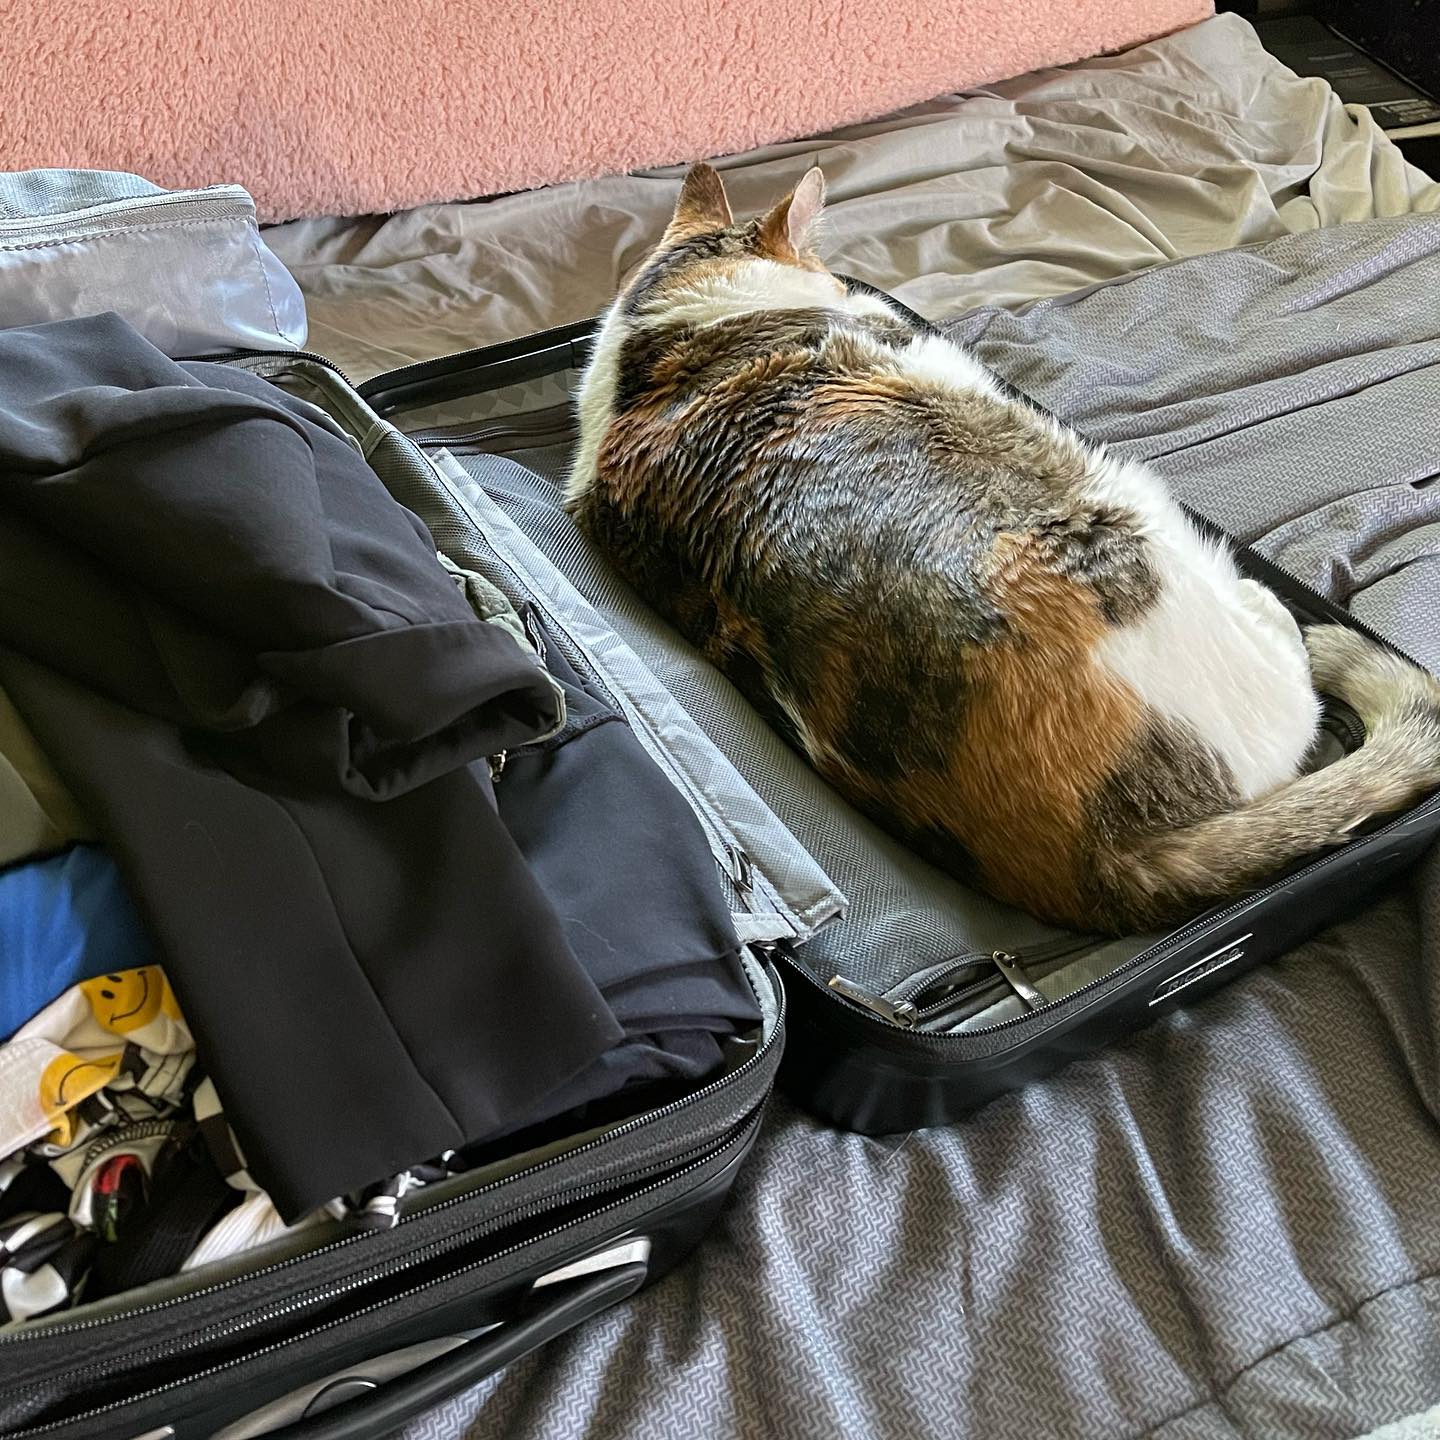 I think Sarah wants to go on our daughter's work trip.